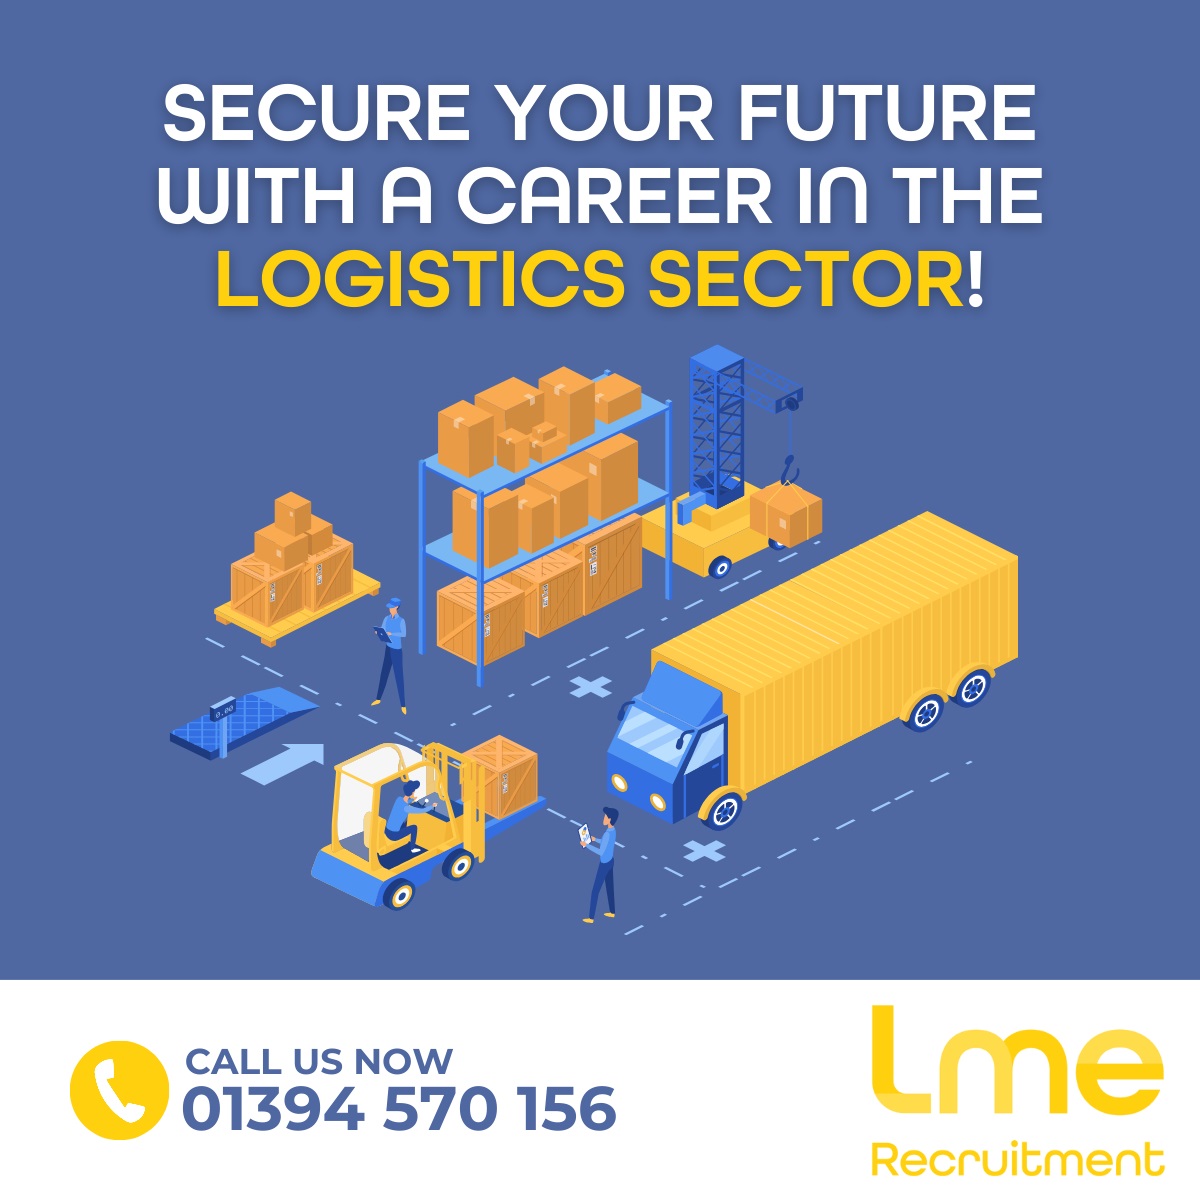 Secure your future with a career in the logistics sector!

If you’re a candidate, looking to get into a logistics role, then get in touch with LME.

Contact us on: info@lmerecruitment.com or 01394 570 156.

#recruitment #felixstowe #shippingjobs #logisticsjobs #logisticsmadeeasy